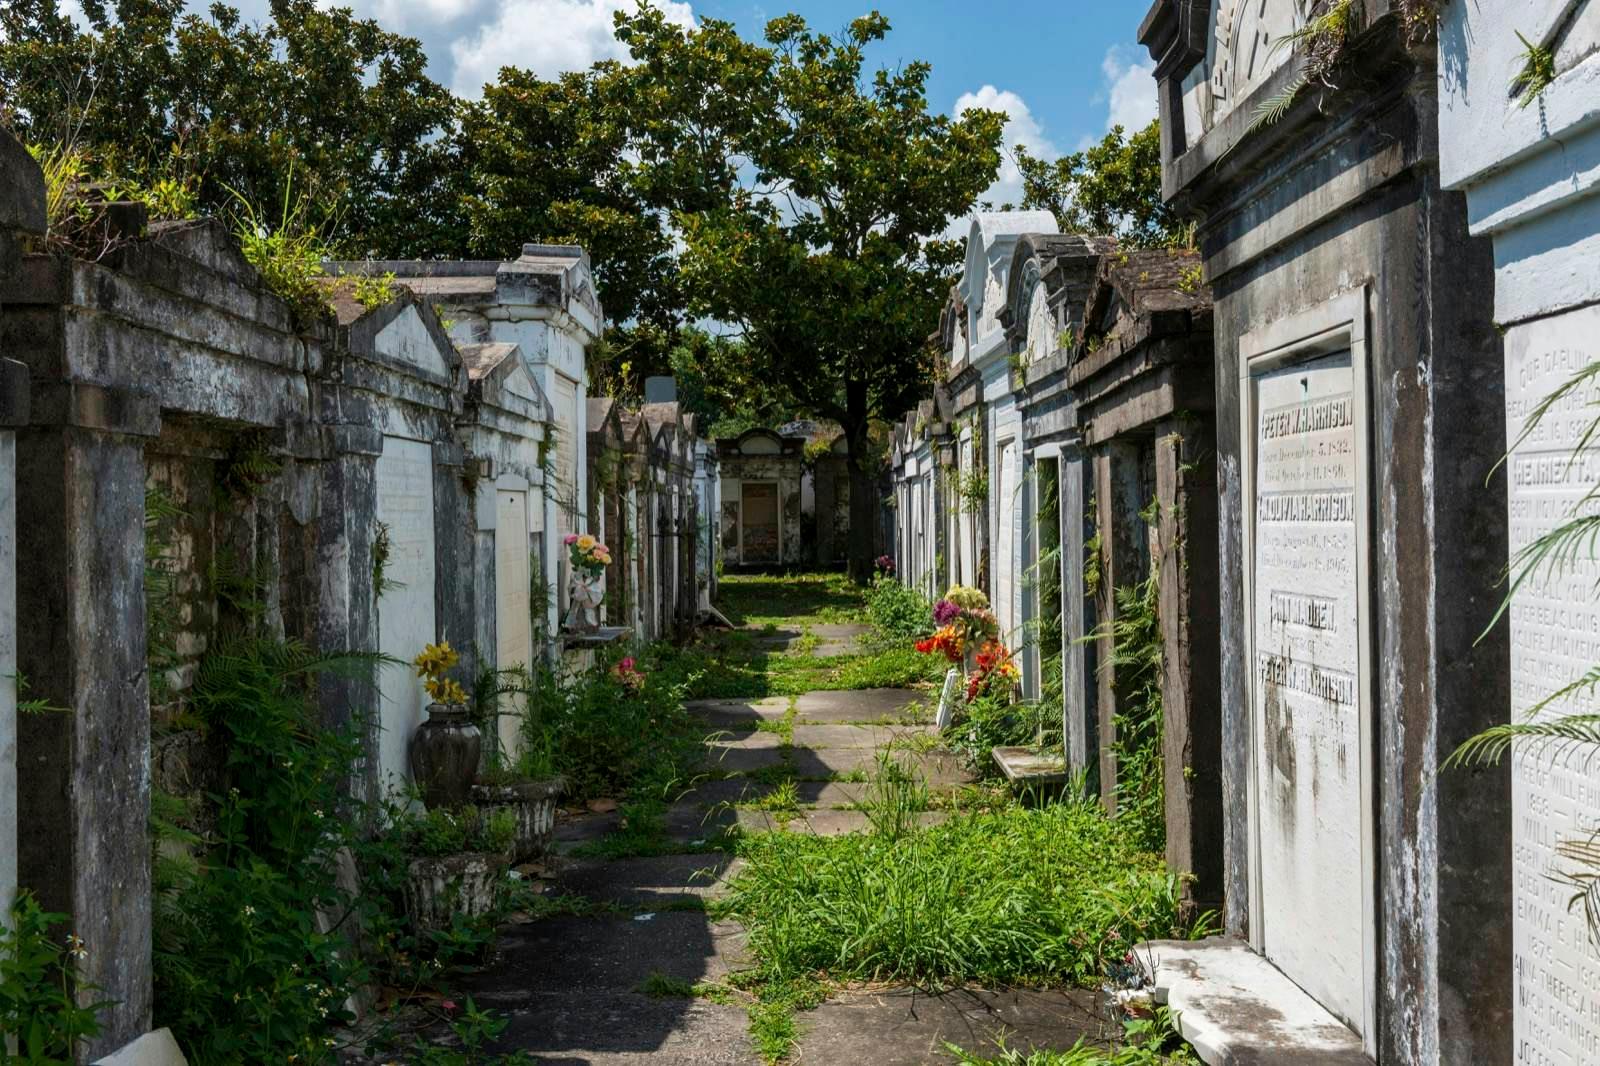 Rows of tombs, some covered in green brush, at the Lafayette Cemetery No. 1; free things New Orleans 